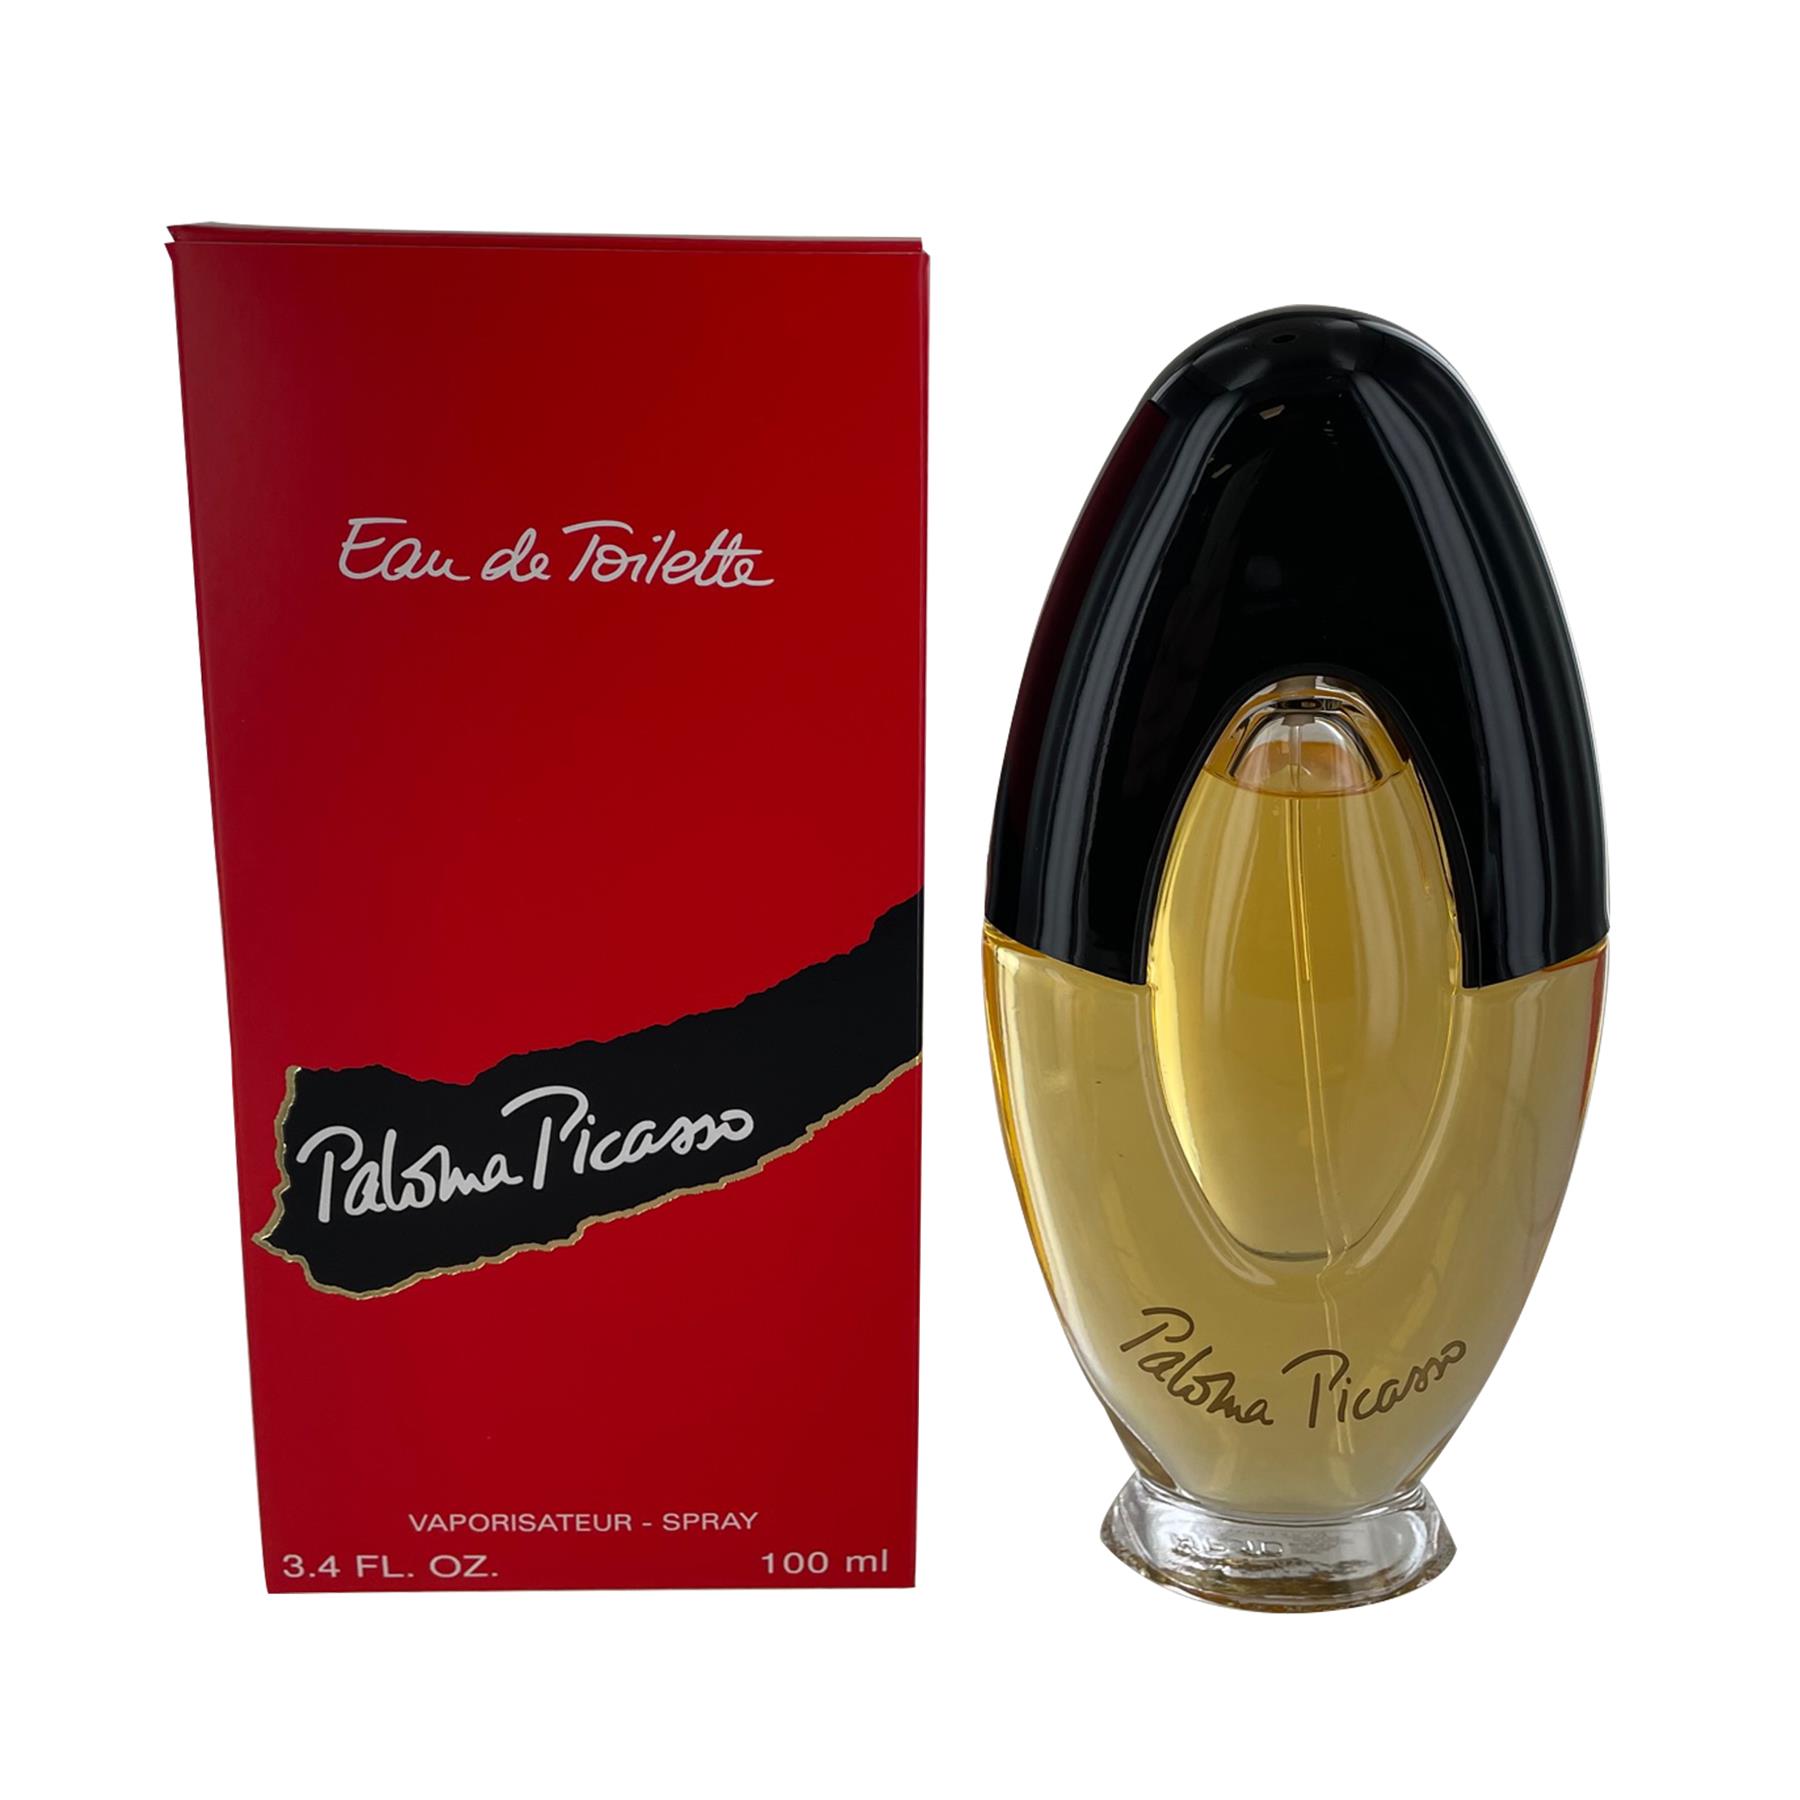 Paloma Picasso Eau de Toilette 100ml Spray for Her from Perfume Plus Direct